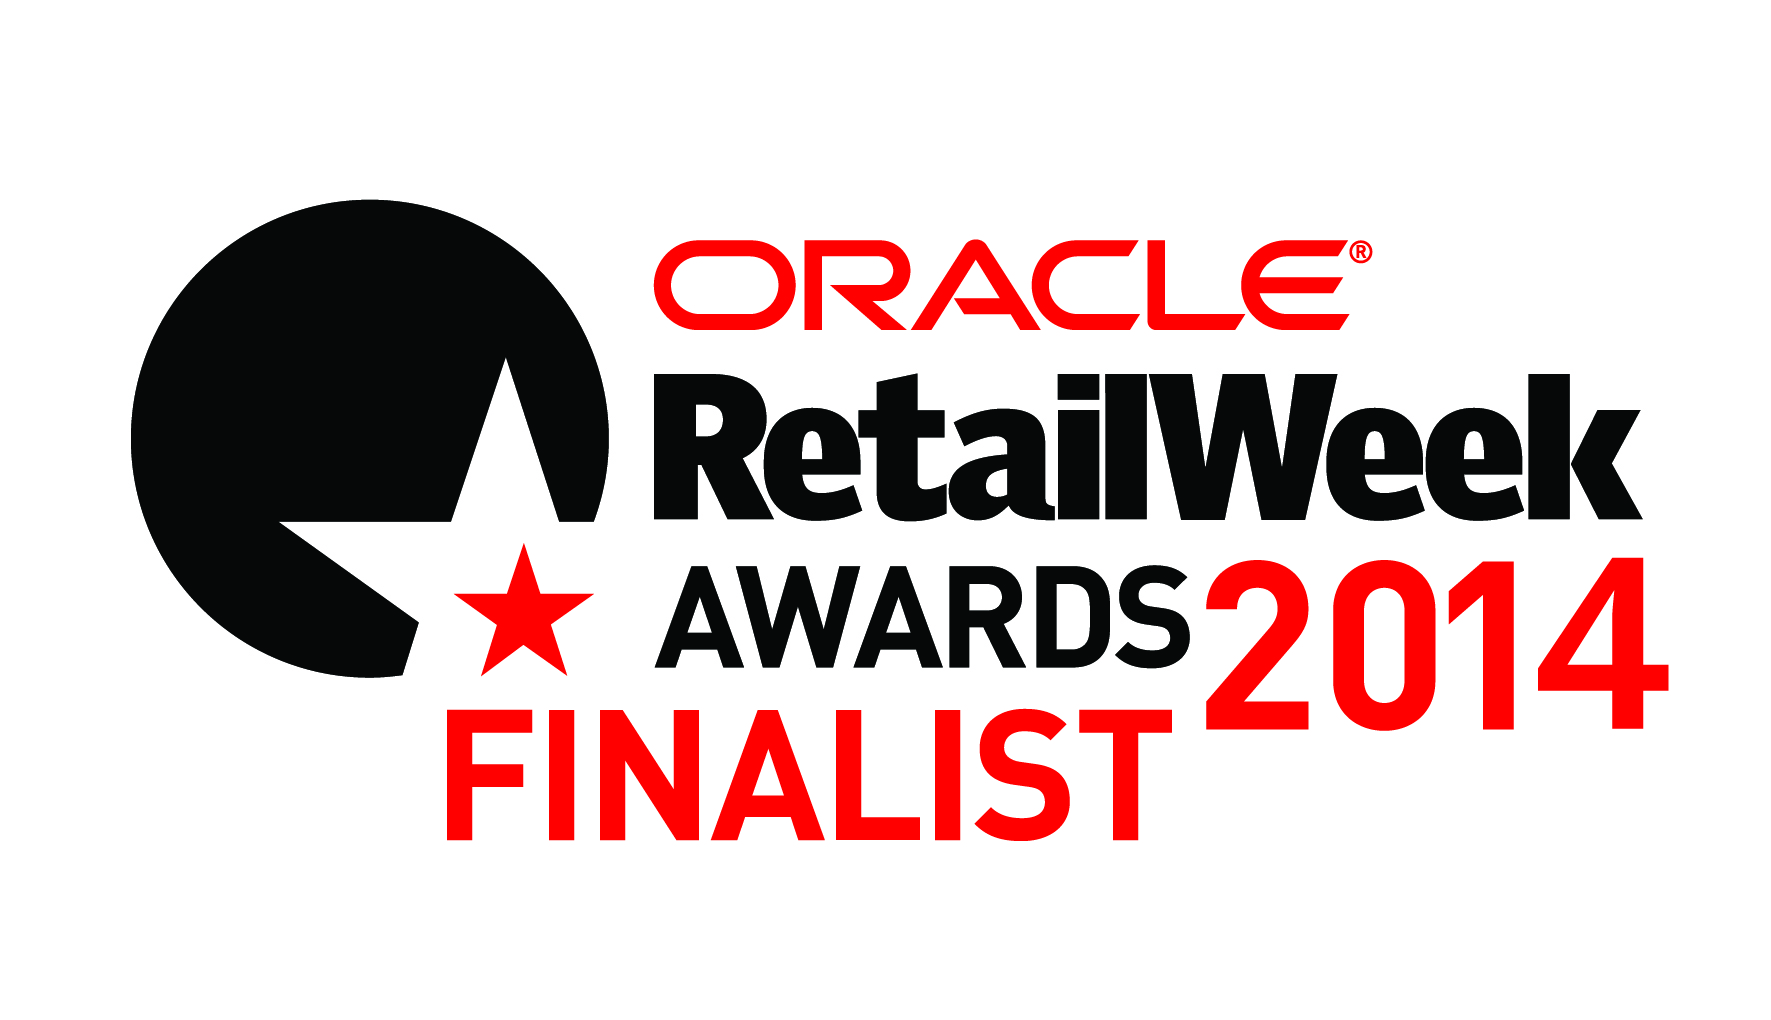 Screwfix Shortlisted For Three Oracle Retail Week Awards